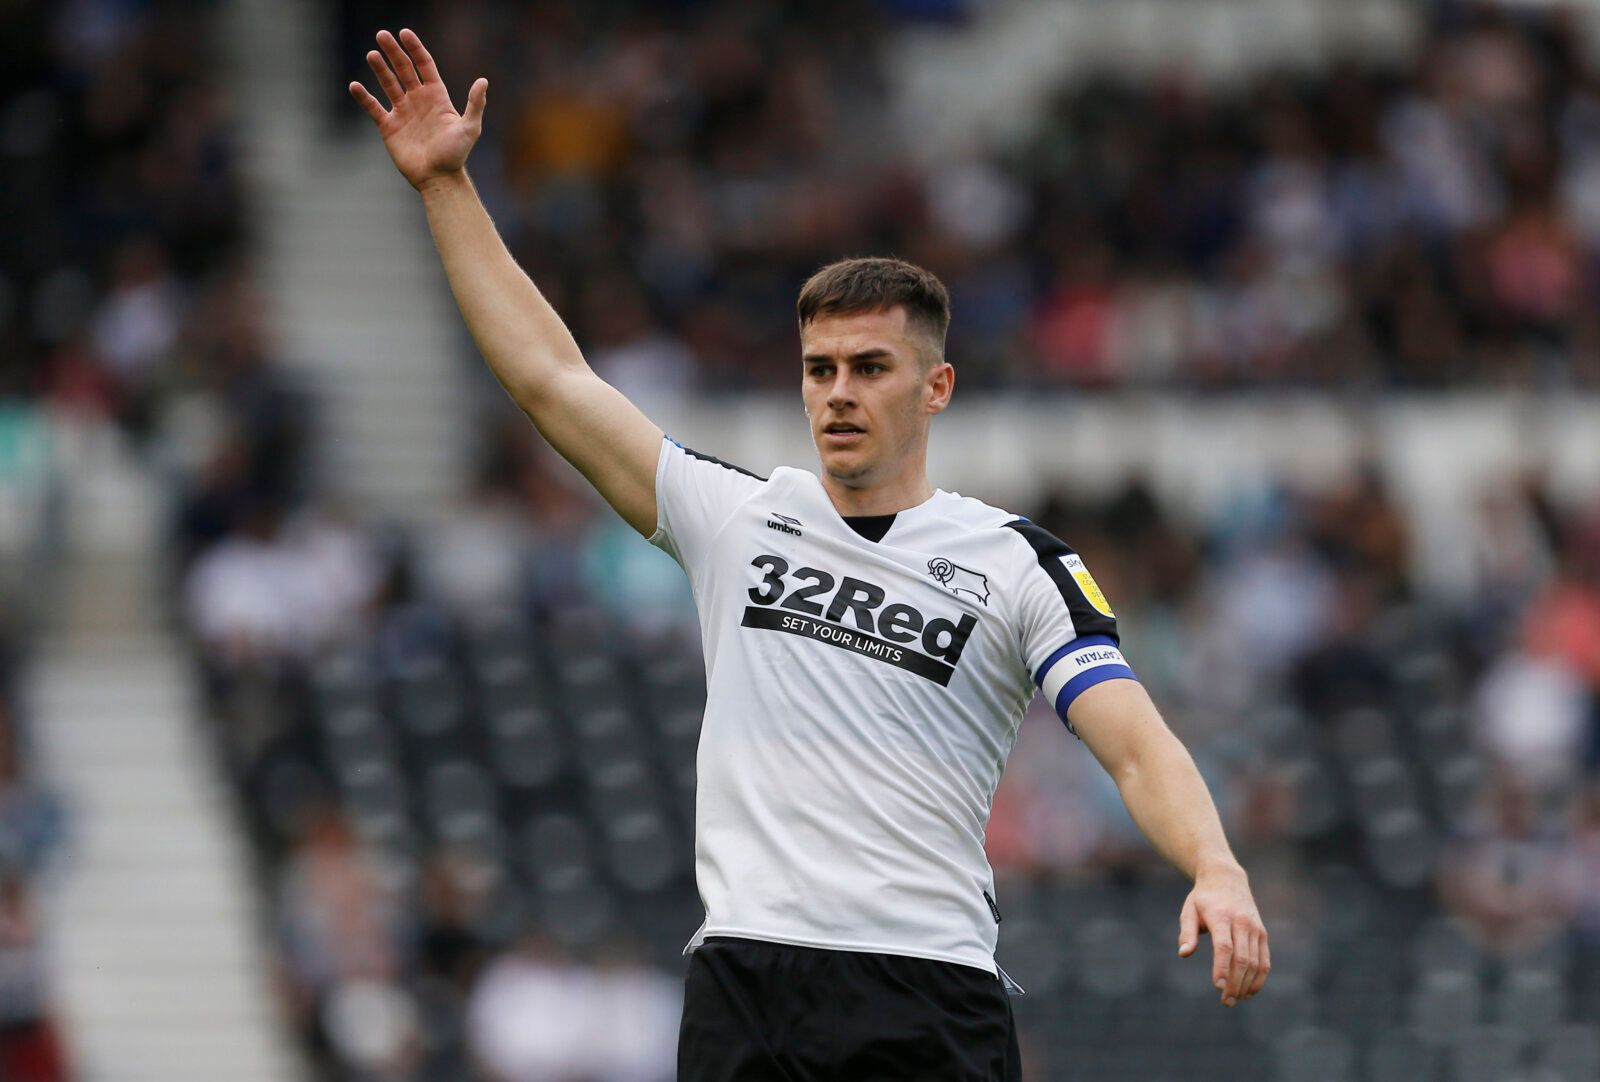 Soccer Football - Championship - Derby County v Huddersfield Town - Pride Park, Derby, Britain - August 7, 2021  Derby County's Tom Lawrence looks on Action Images/Craig Brough